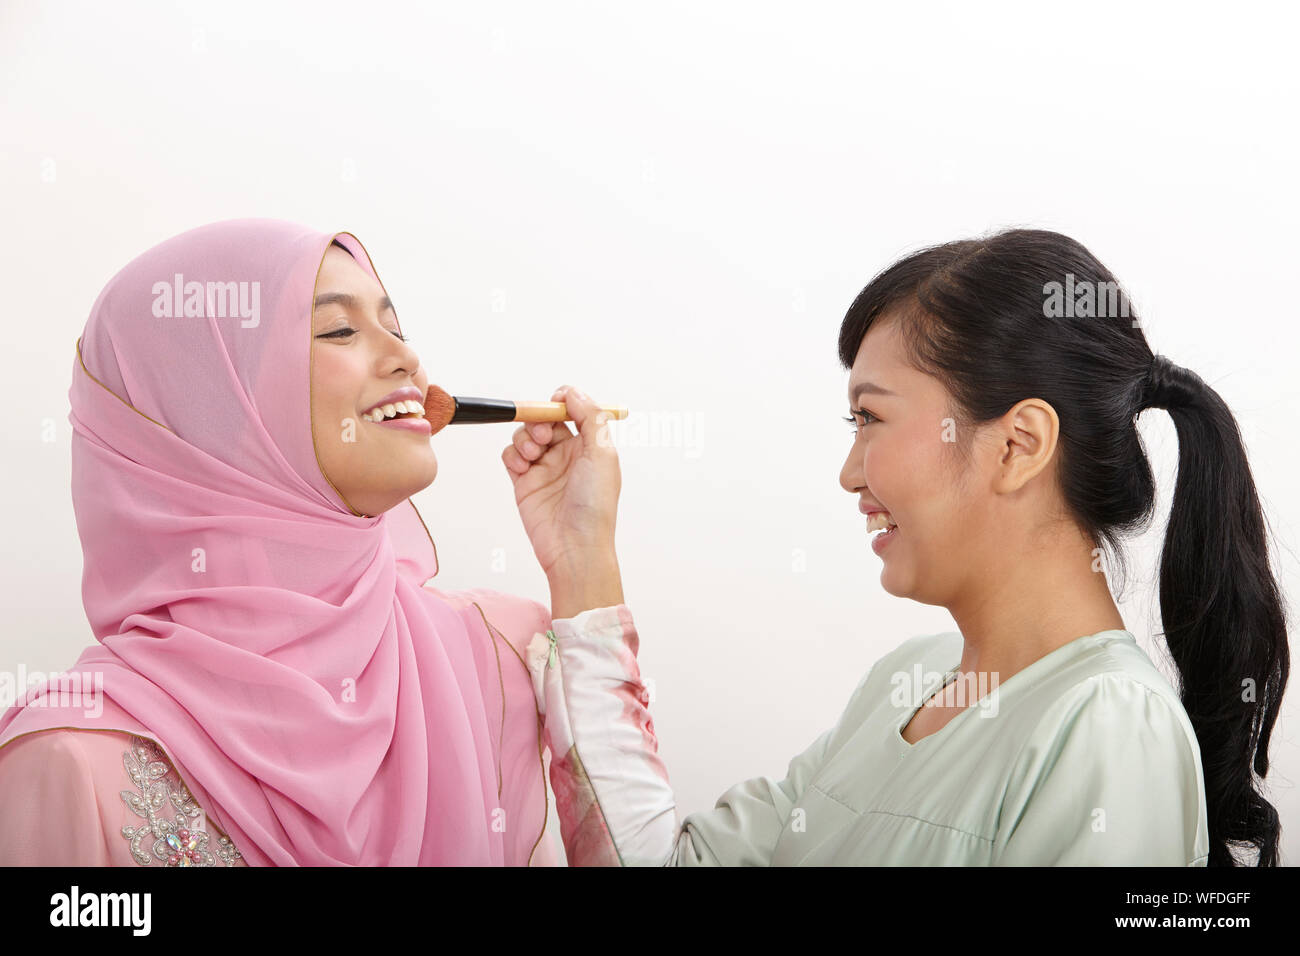 friendship, woman helping her friend putting makeup on the white background Stock Photo